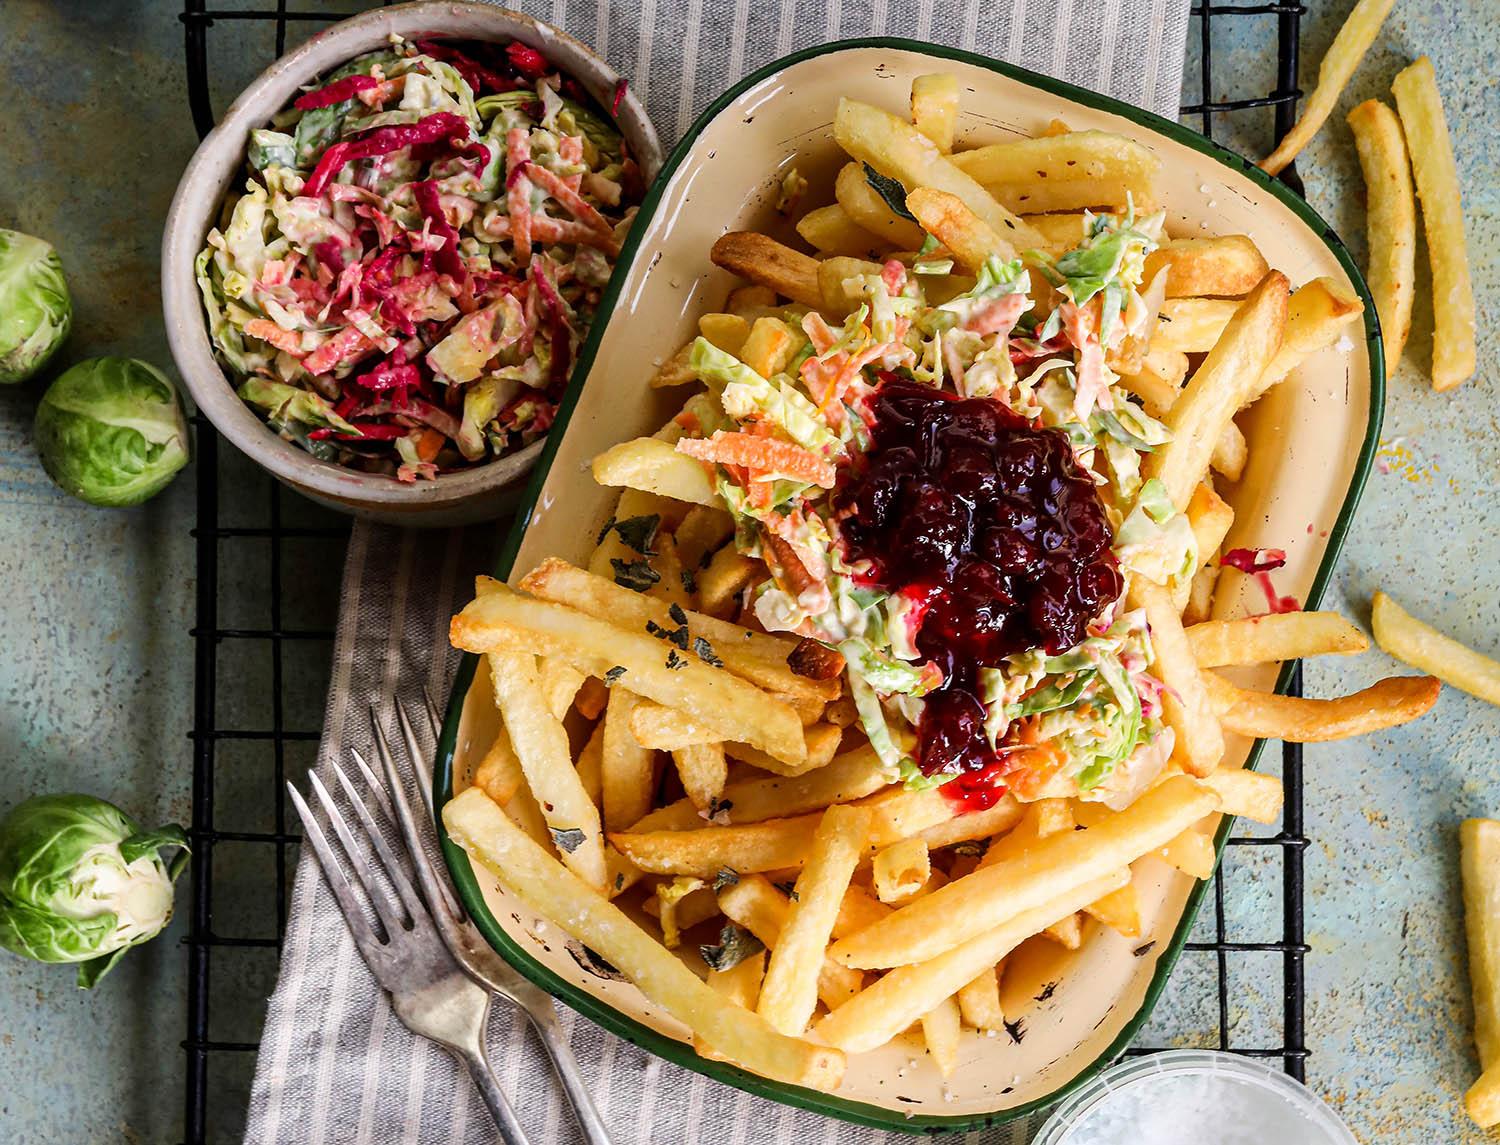 Skinny Fries with Sprout Slaw and Sea Salt